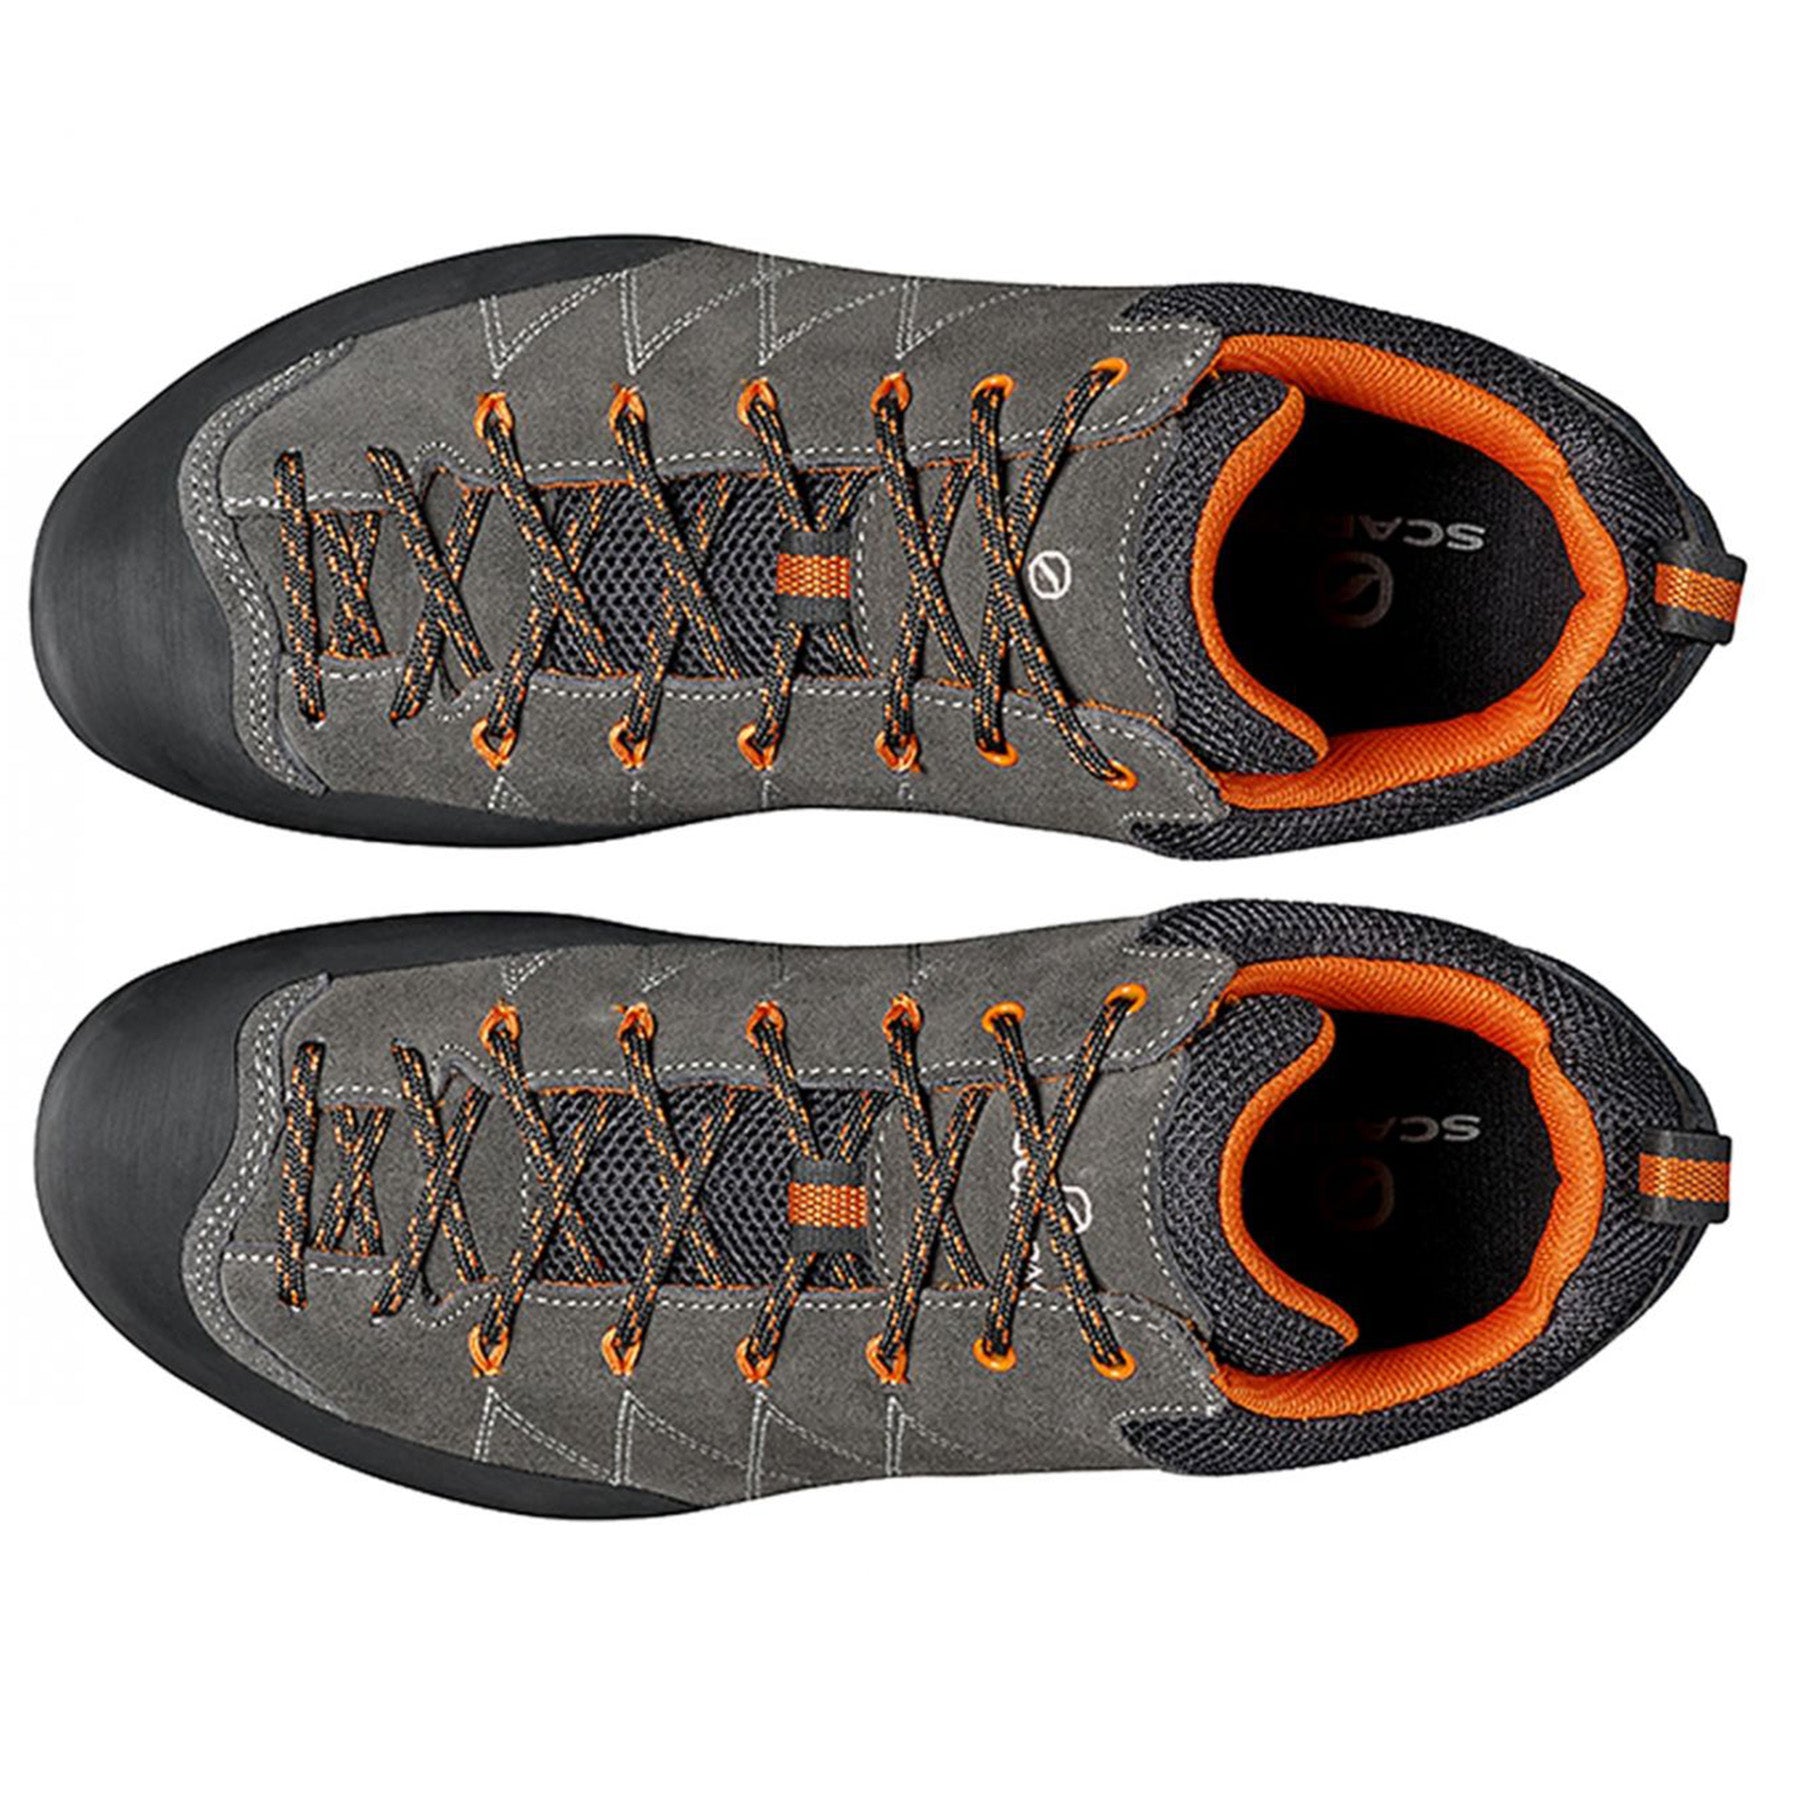 a view looking down on a pair of men's crux approach shoes